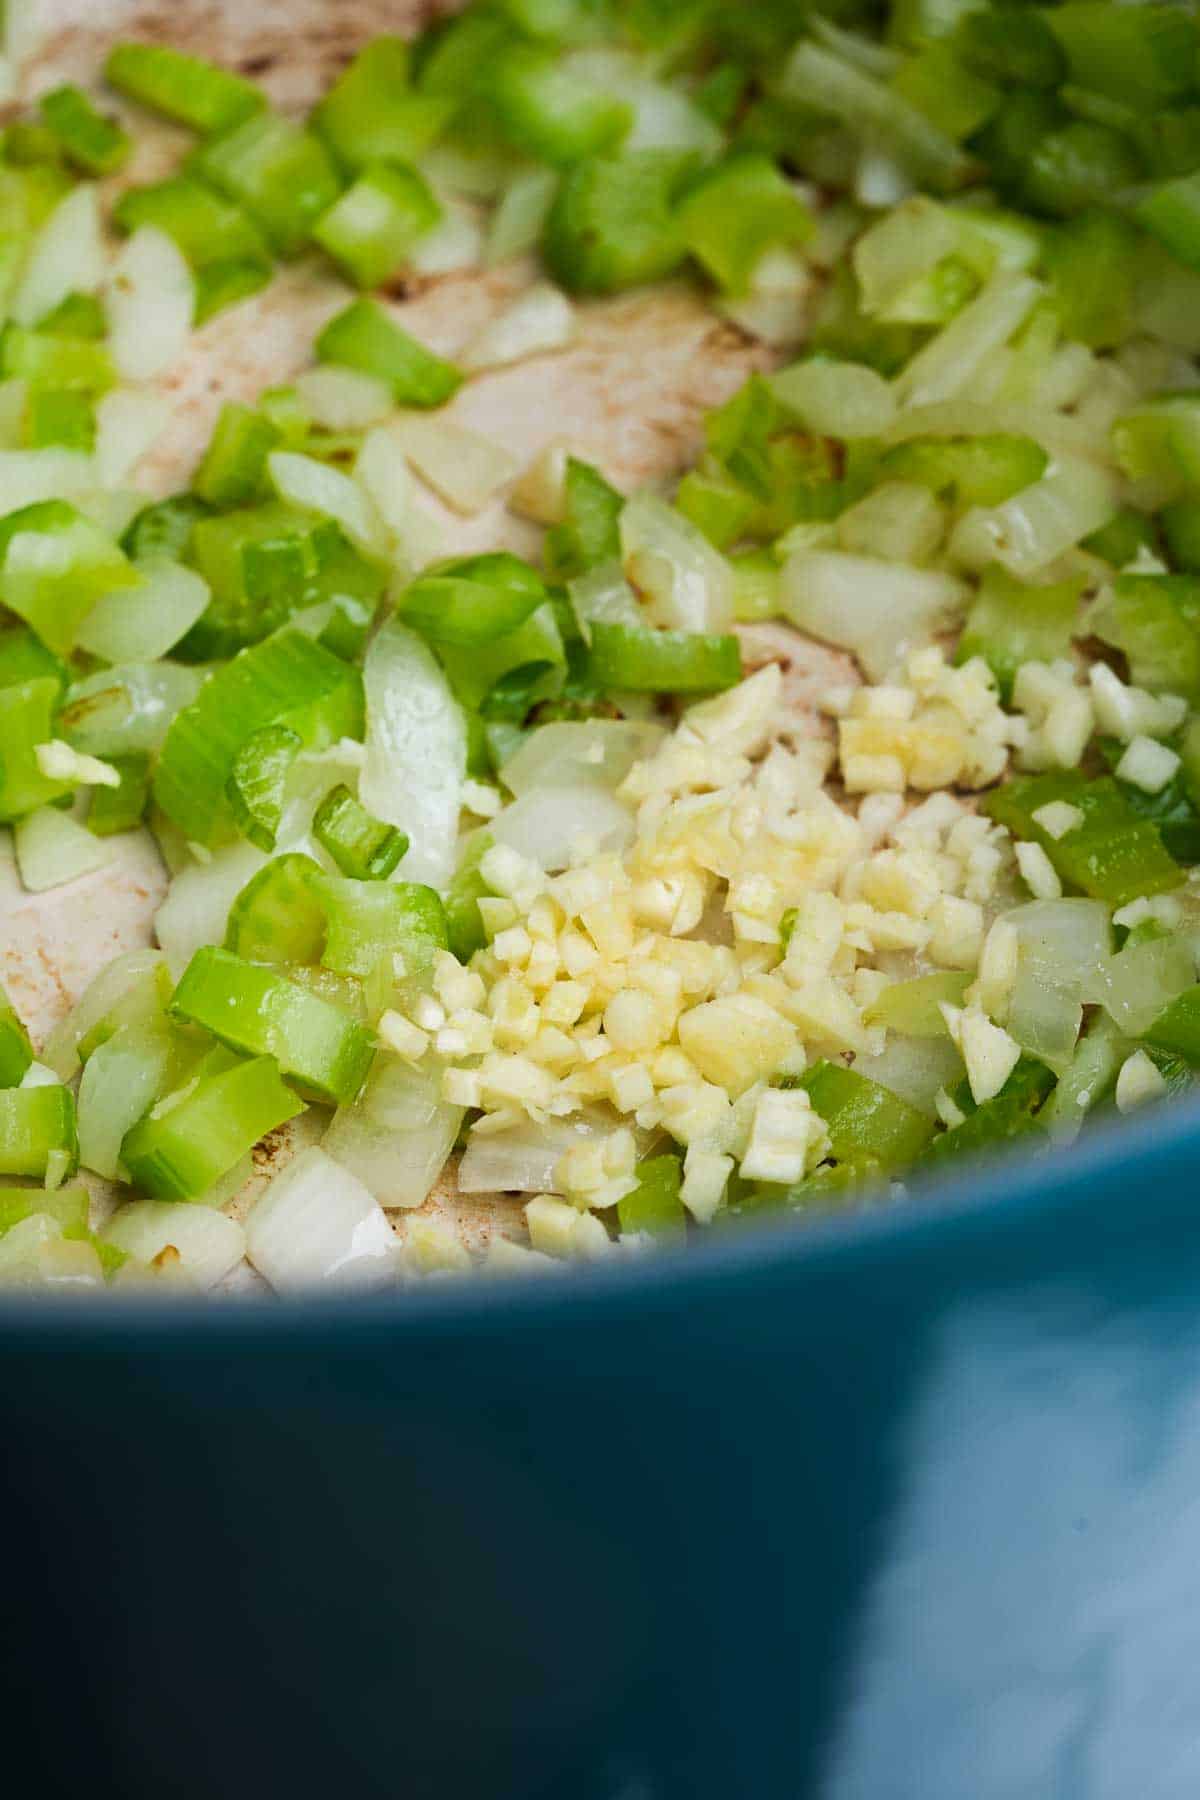 A pot of sauteing onions and celery gets garlic added to it.